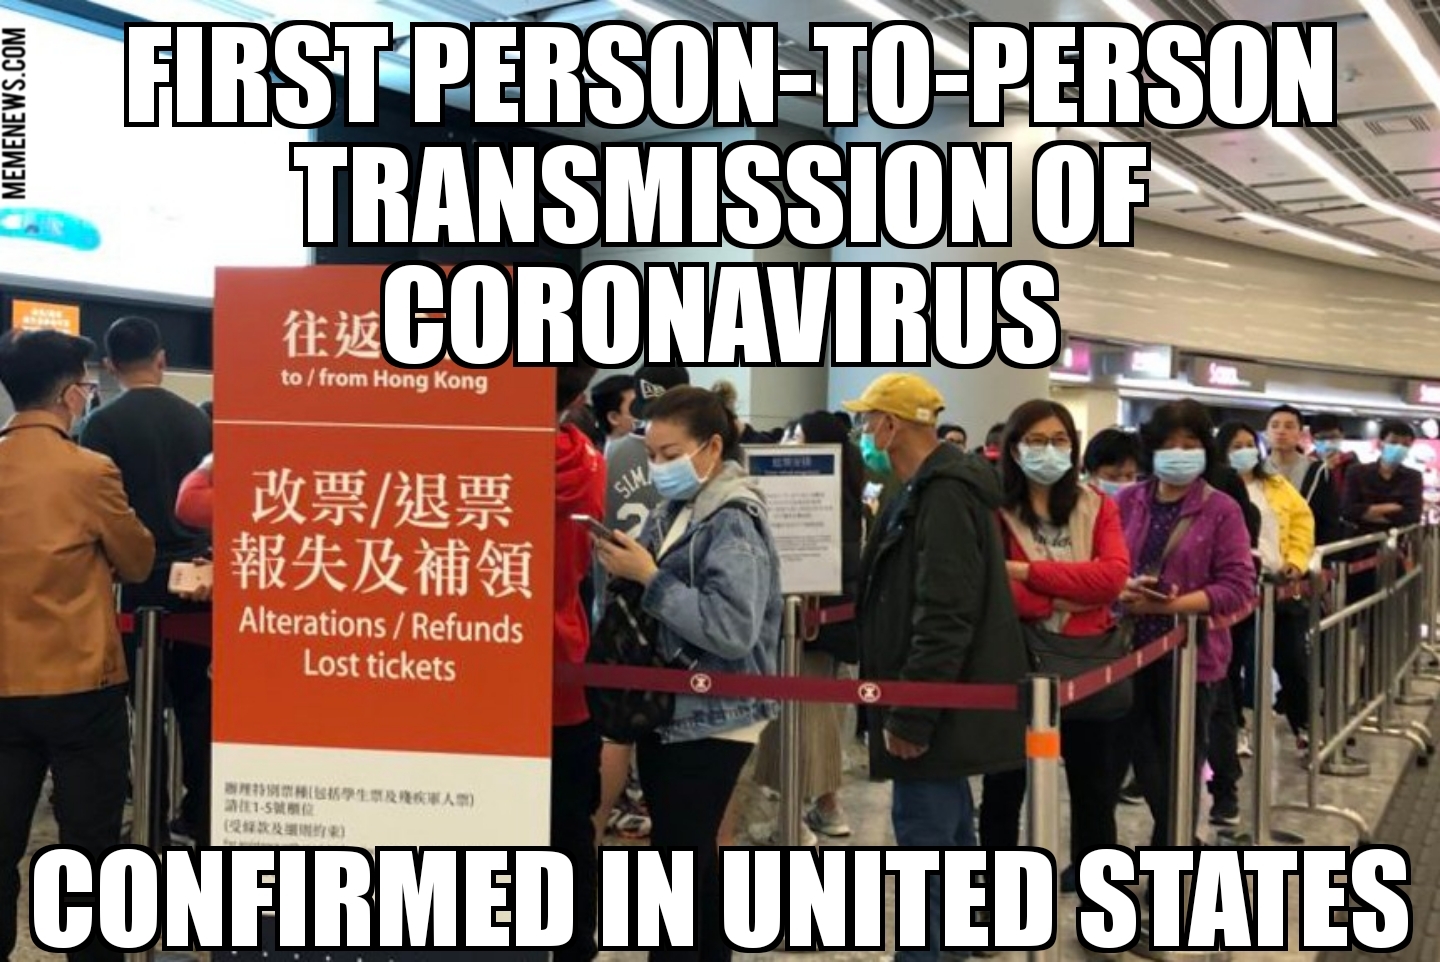 First U.S. person-to-person coronavirus transmission confirmed